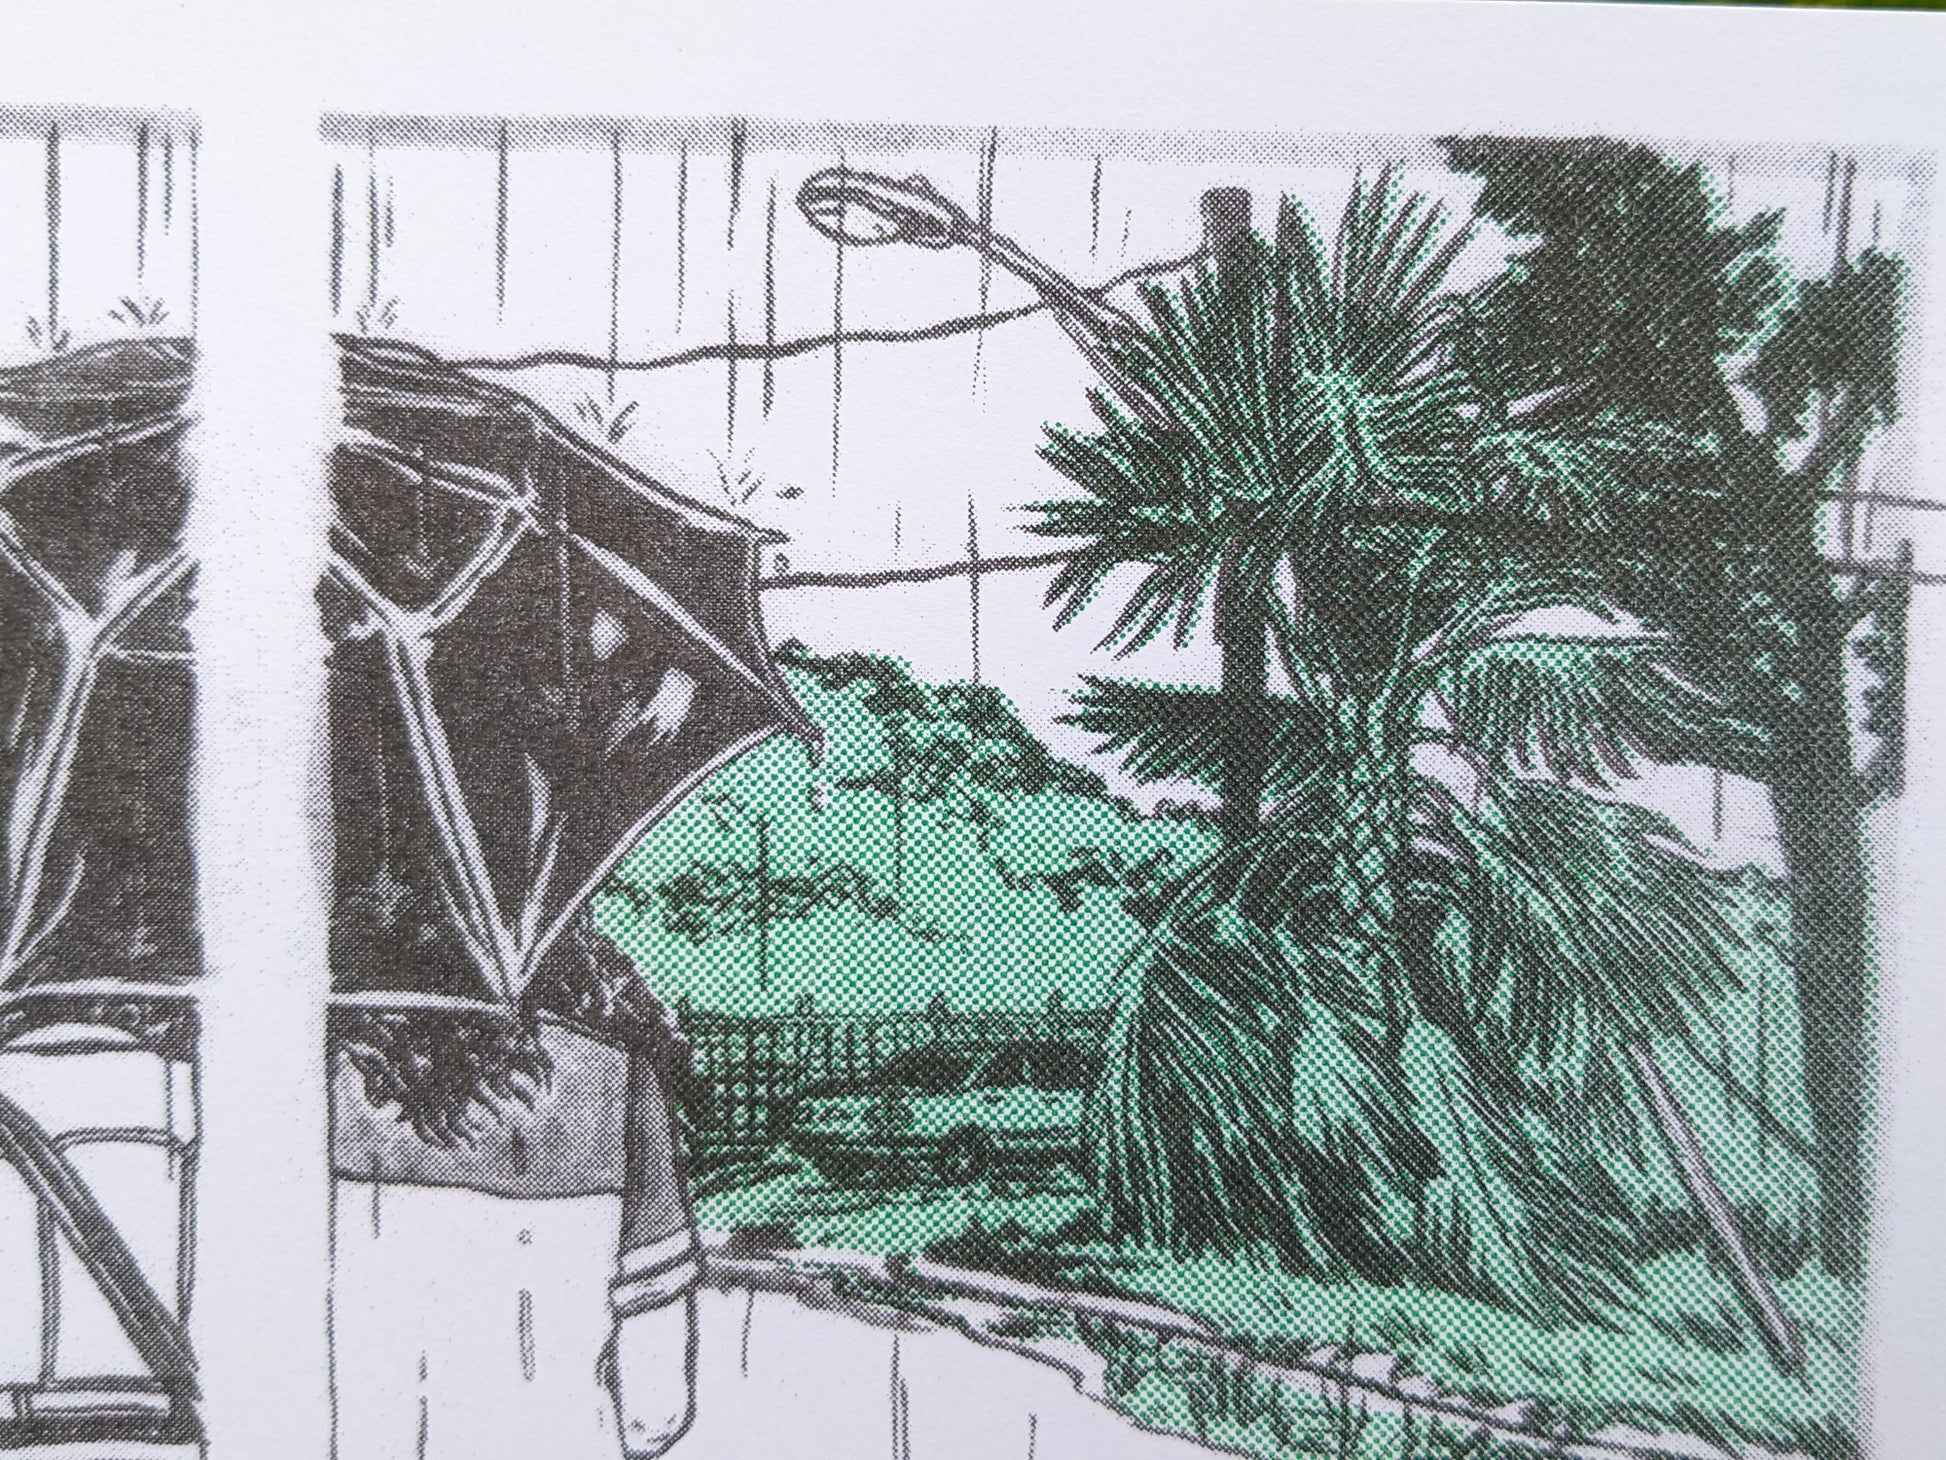 Closeup of risograph print 'Umbrella Share' showing a palm tree and street light.